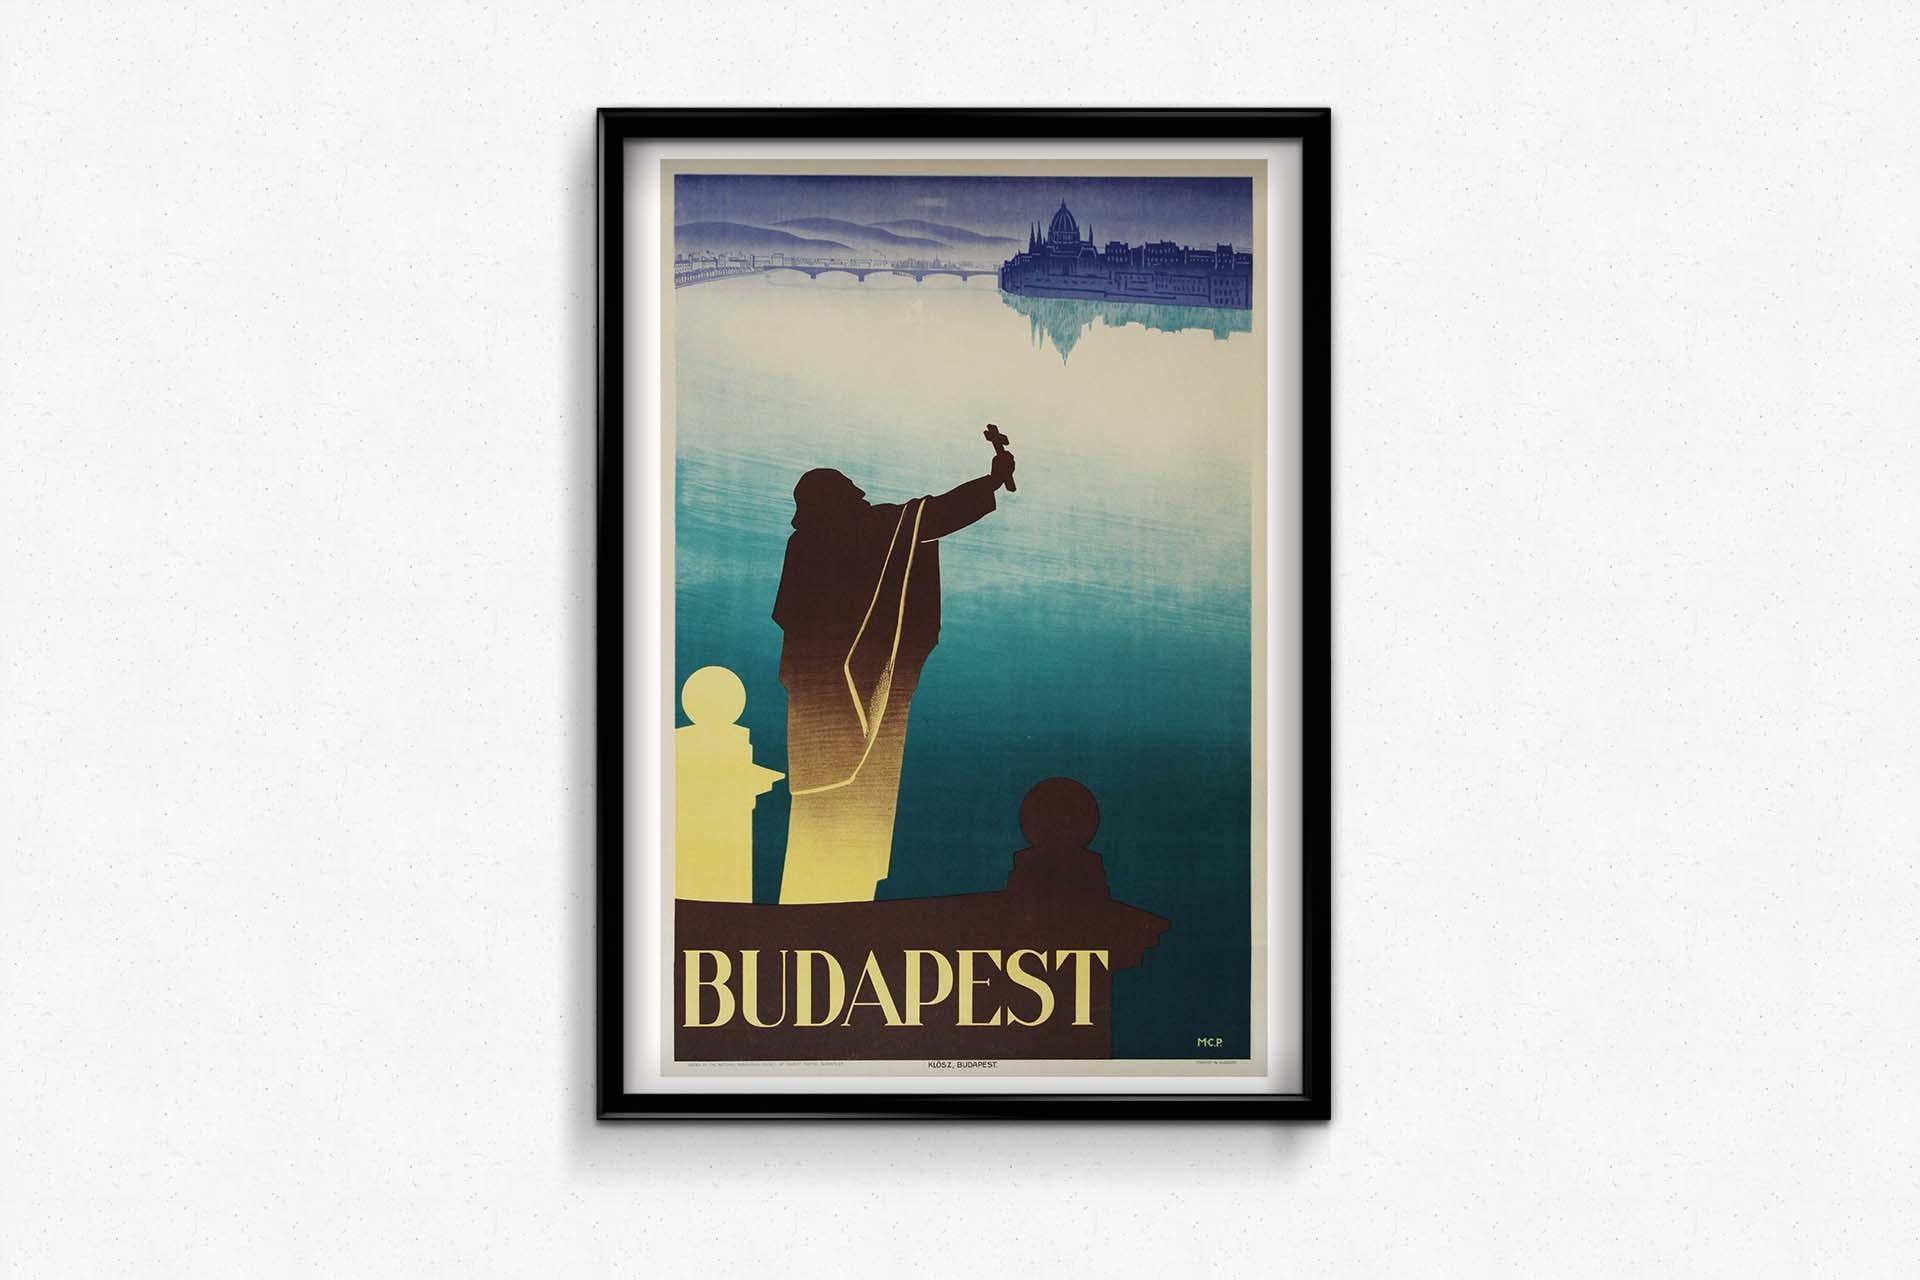 Pal Molnar C.'s circa 1930 original travel poster, depicting Budapest and the majestic Danube River, stands as a captivating testament to the allure of the Hungarian capital. Known for his distinctive style influenced by French Art Deco and modern